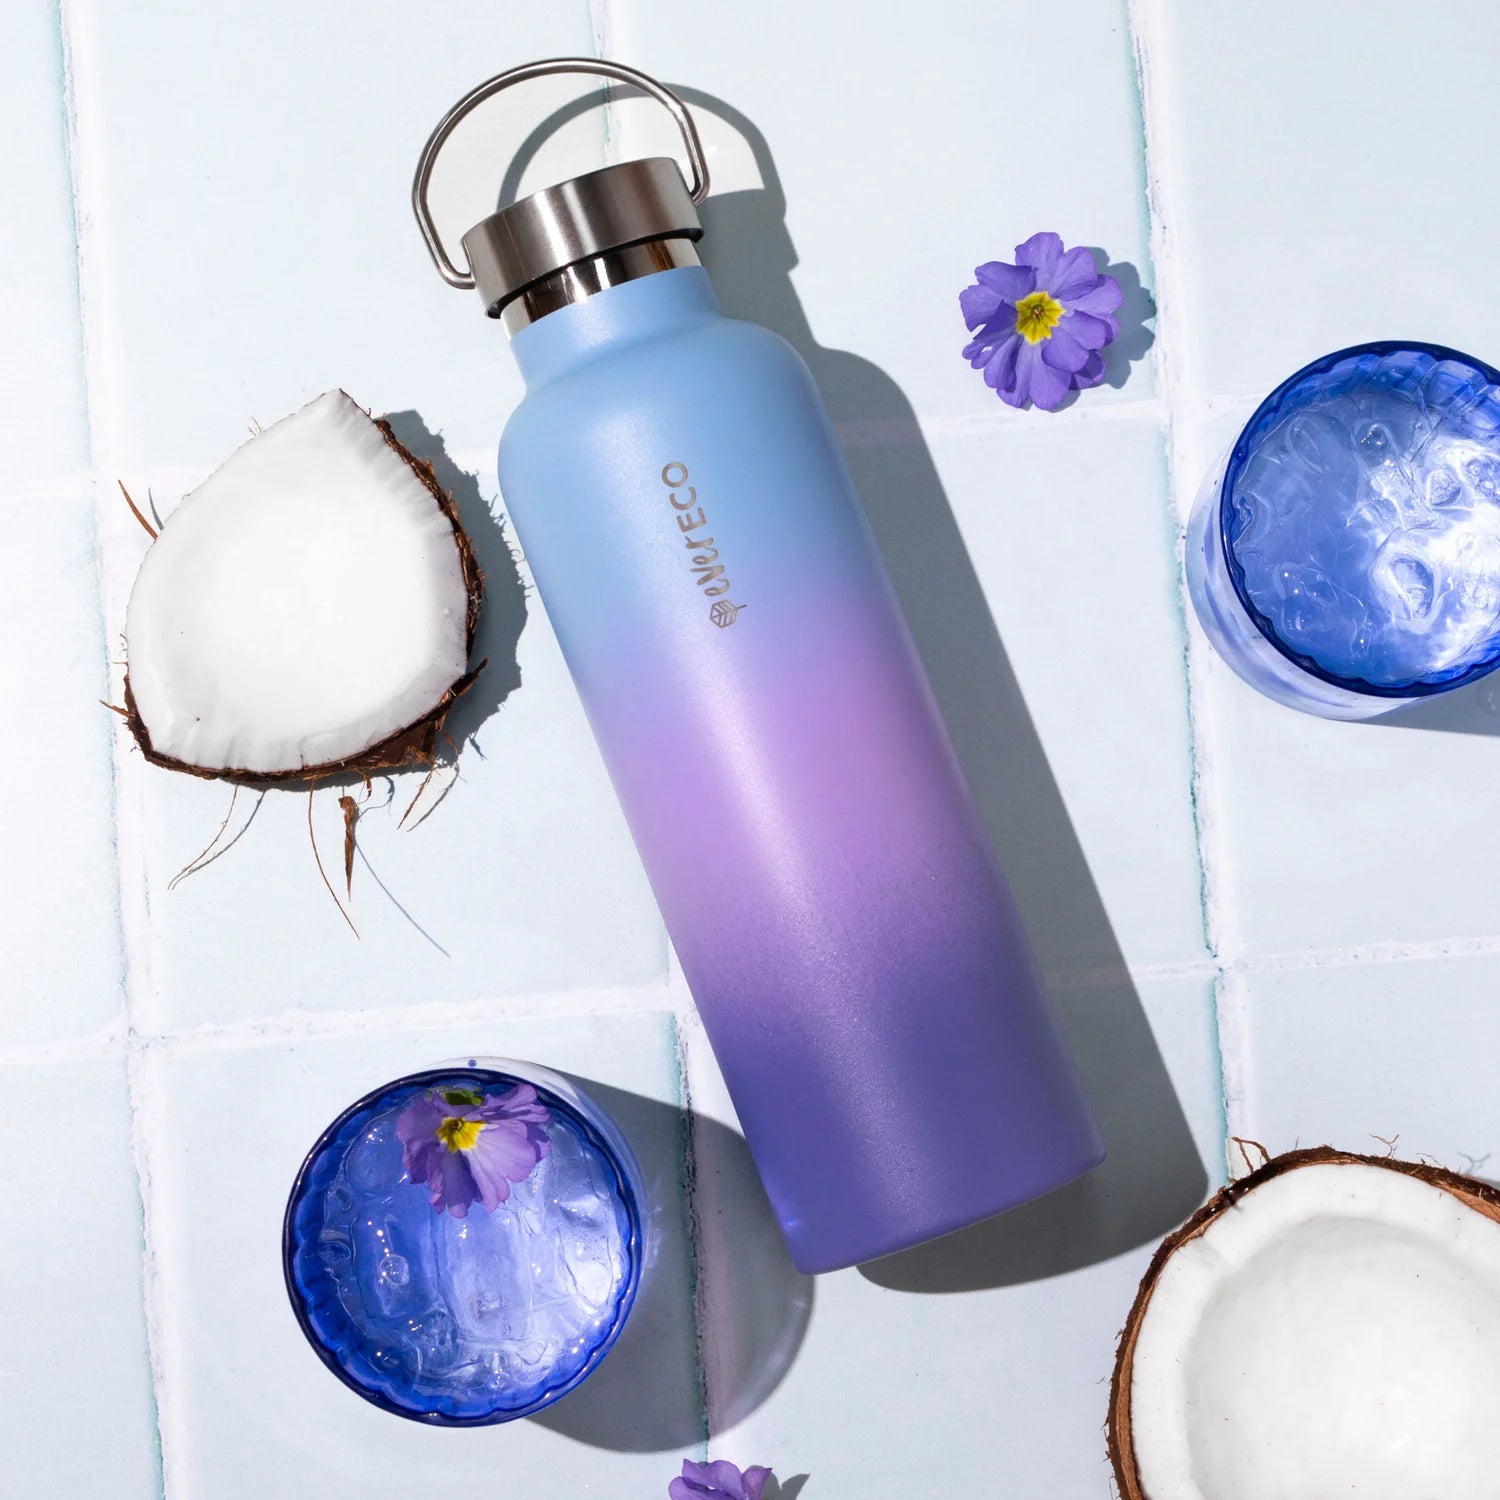 Ever Eco Insulated Stainless Steel Bottle 750ml-The Living Co.